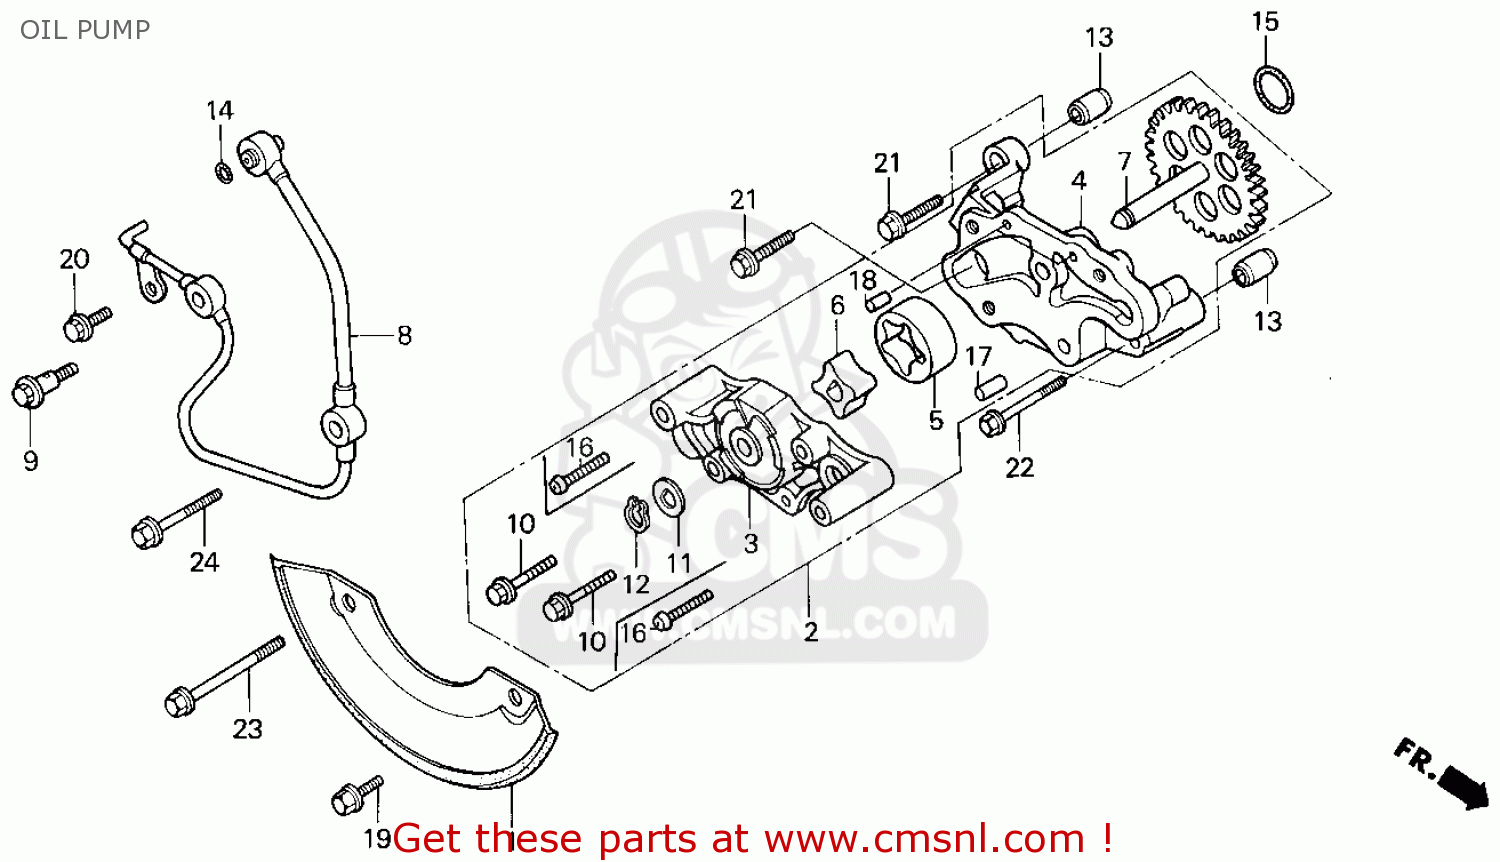 Parts for a 1995 honda fourtrax